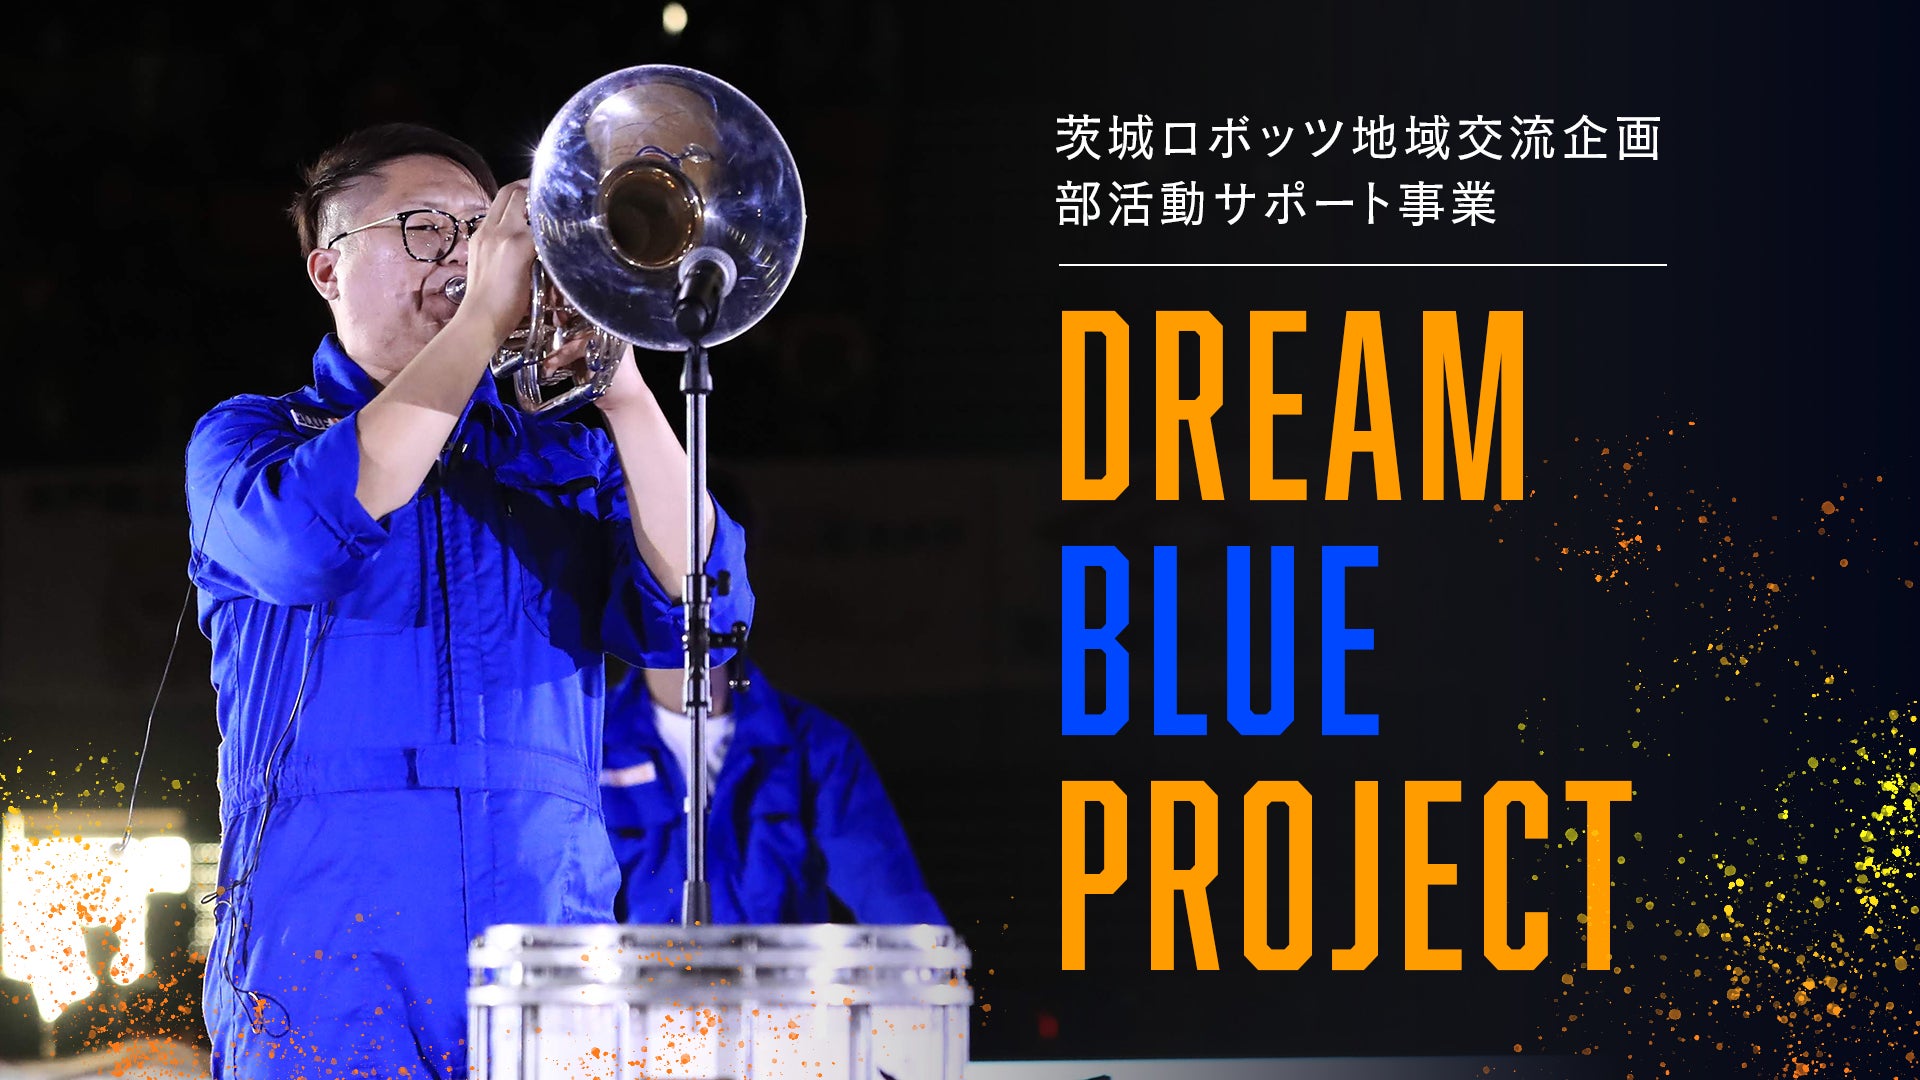 Dream BLUE Project